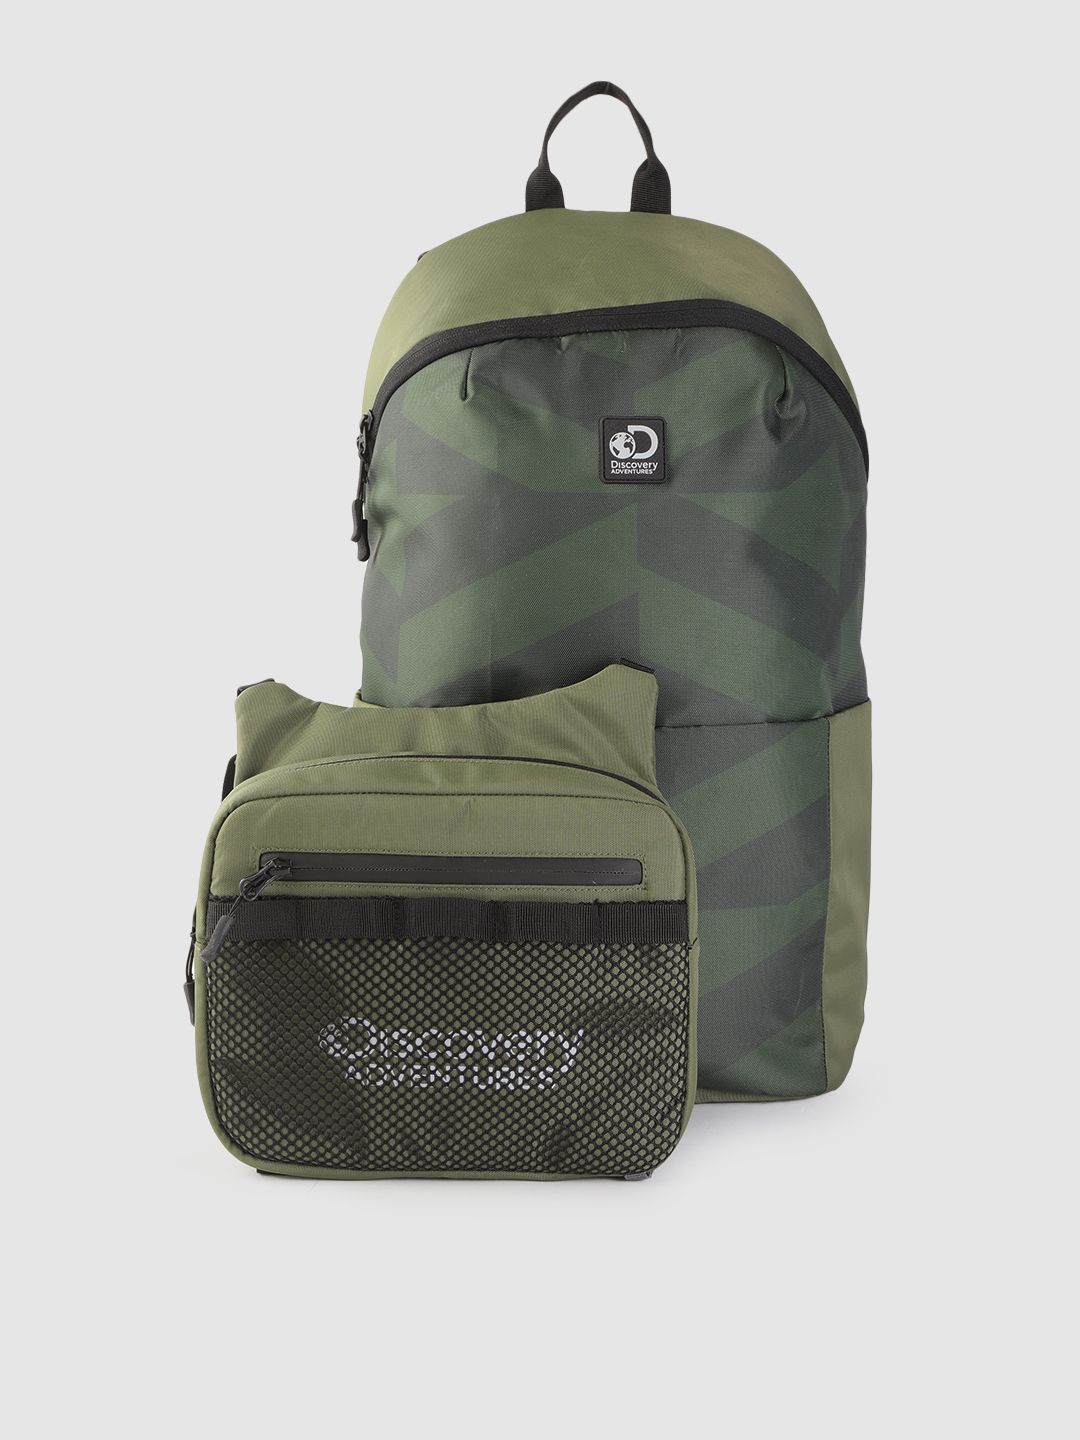 The Roadster Lifestyle Co x Discovery Unisex Olive Green & Black Graphic Print Backpack Price in India